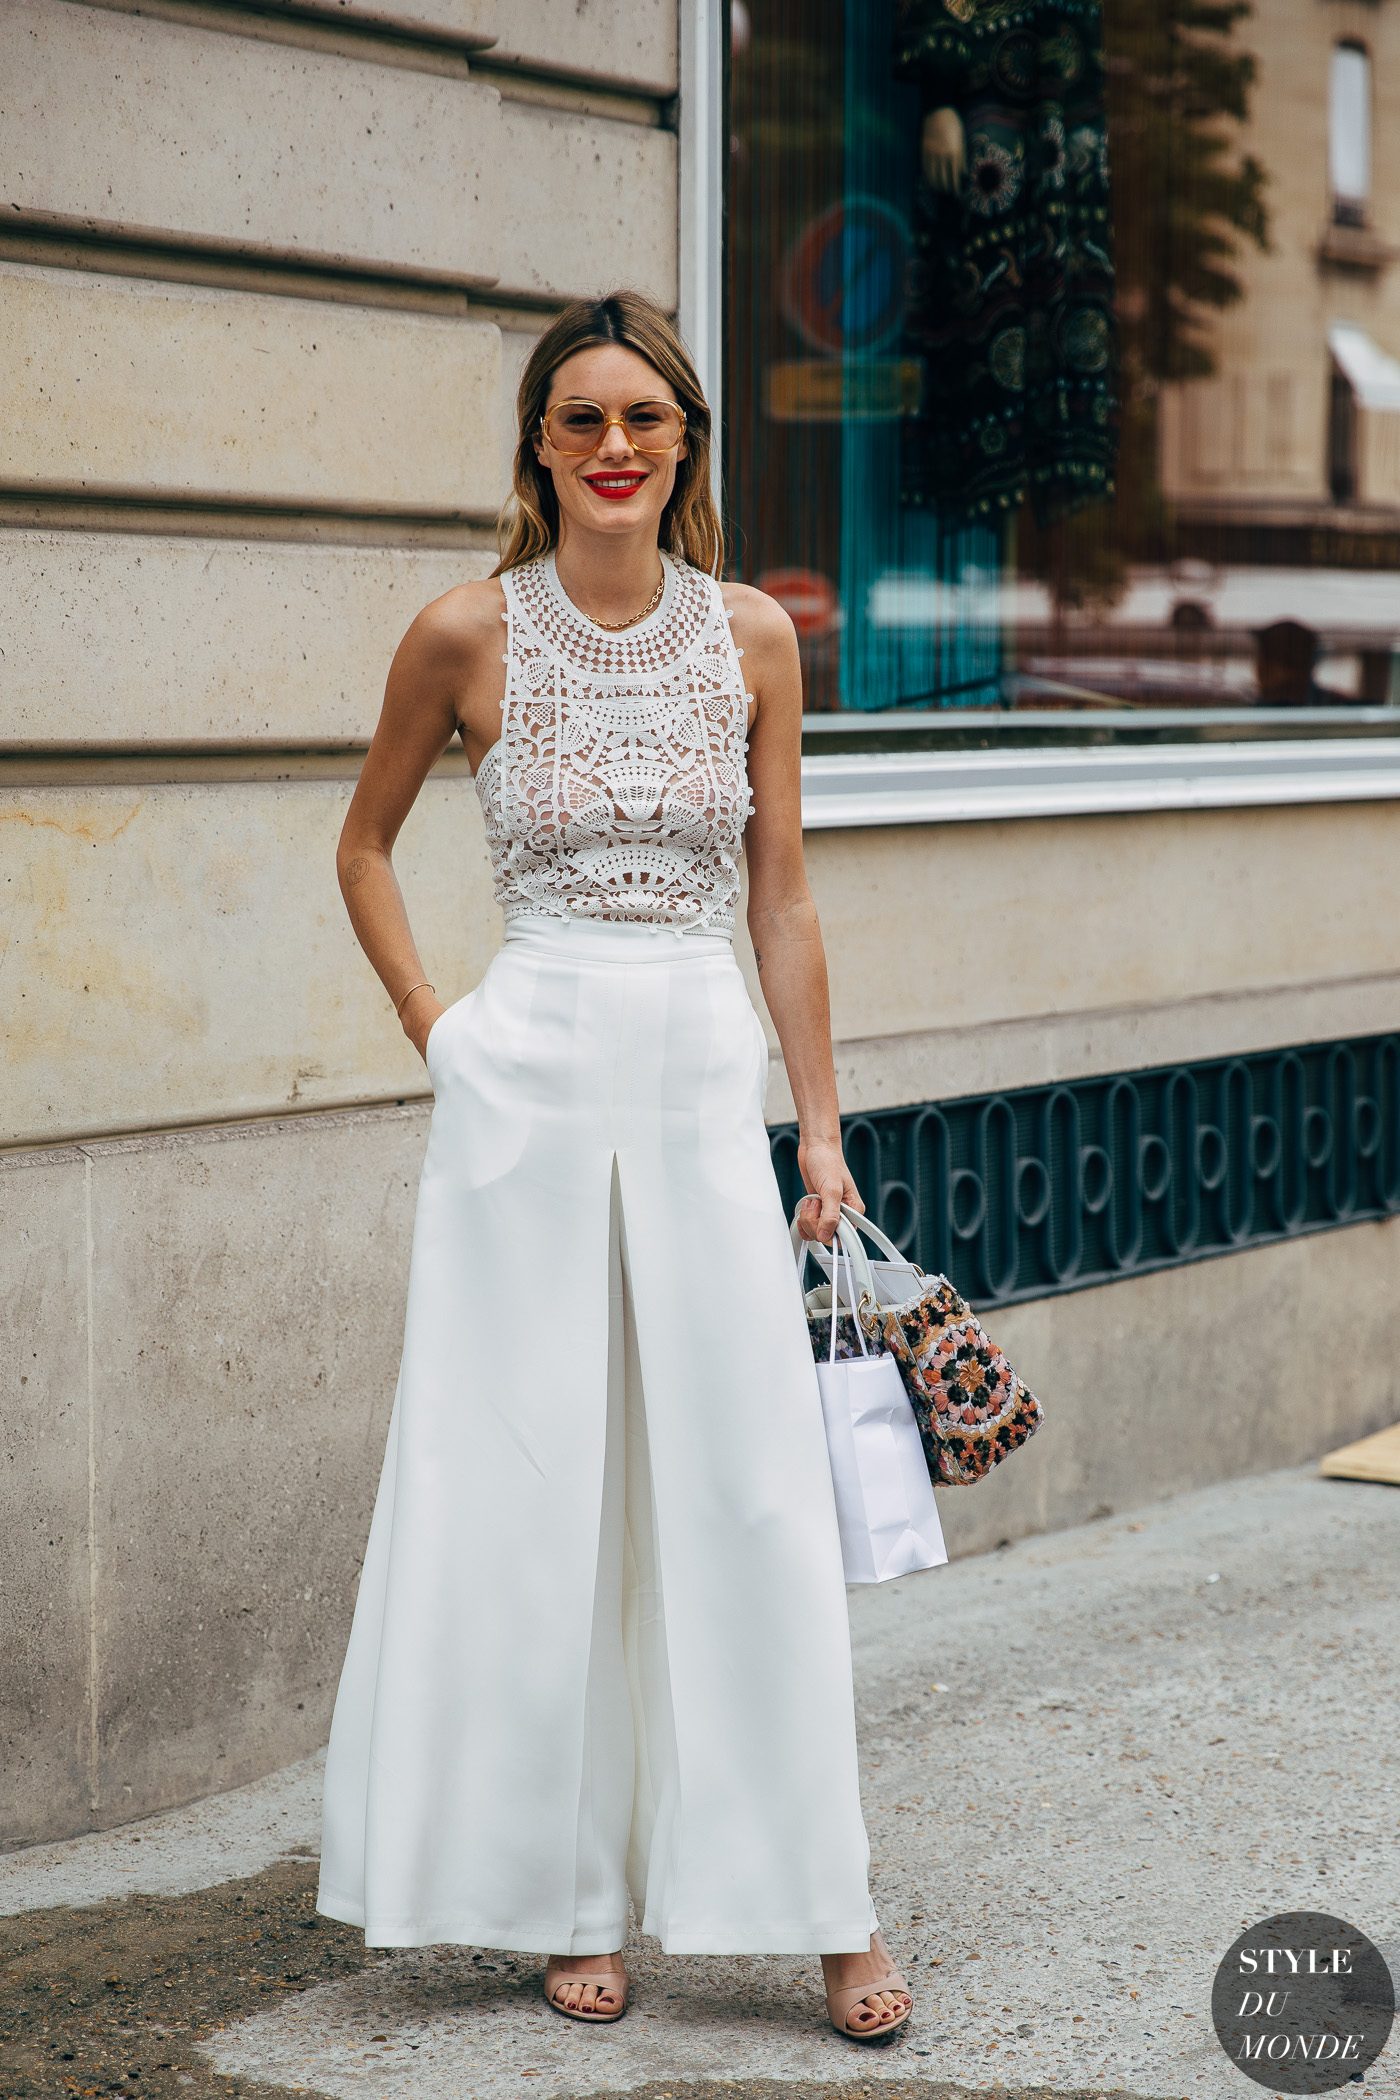 Haute Couture Fall 2019 Street Style: Camille Rowe - STYLE DU MONDE ...